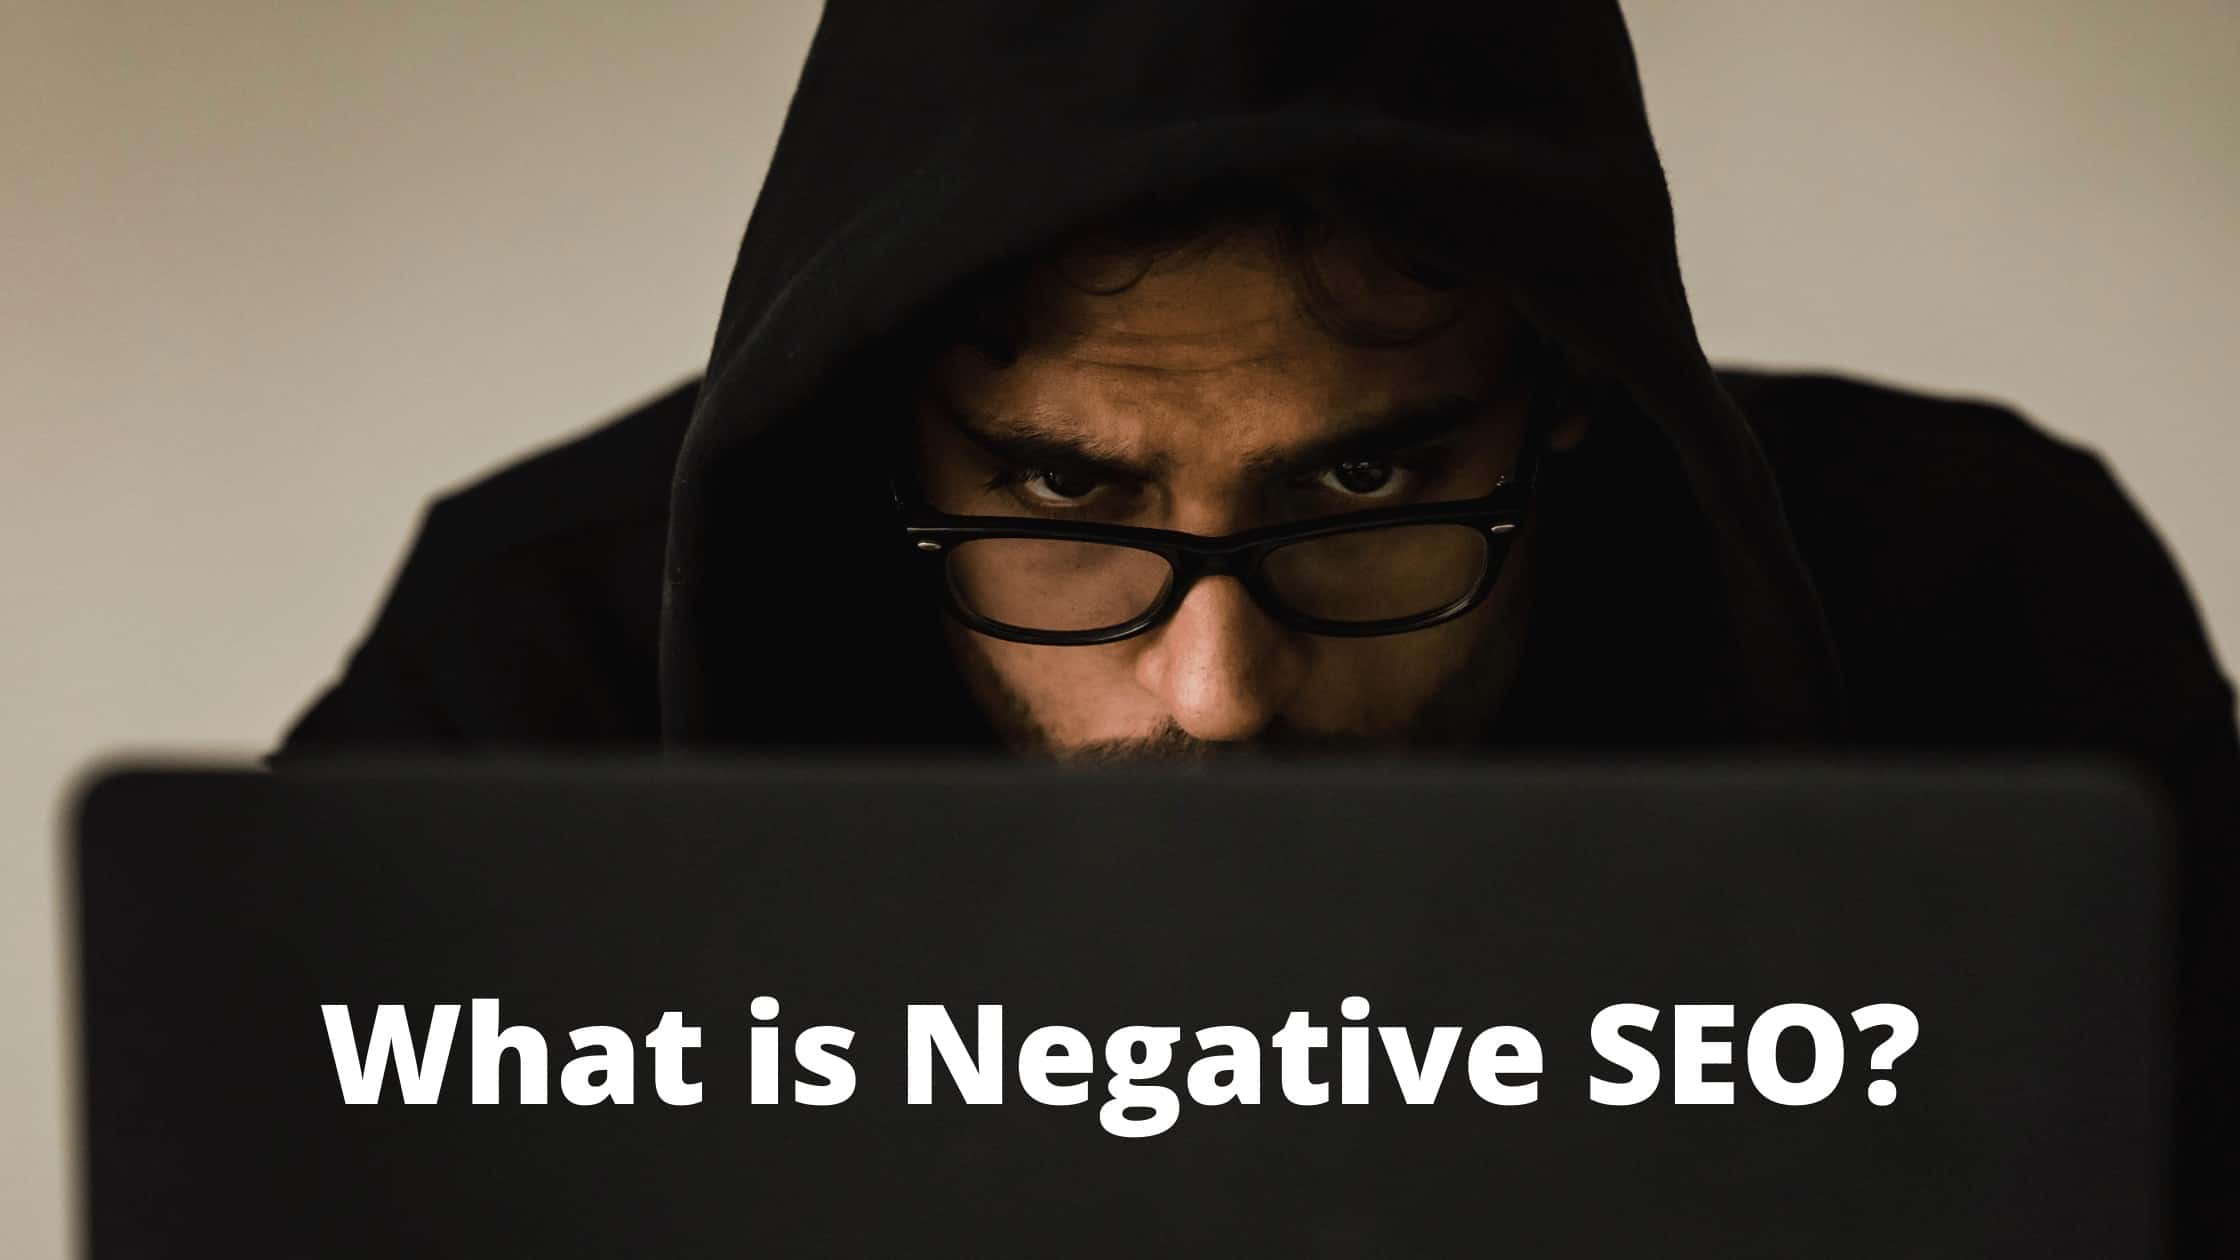 What is negative SEO